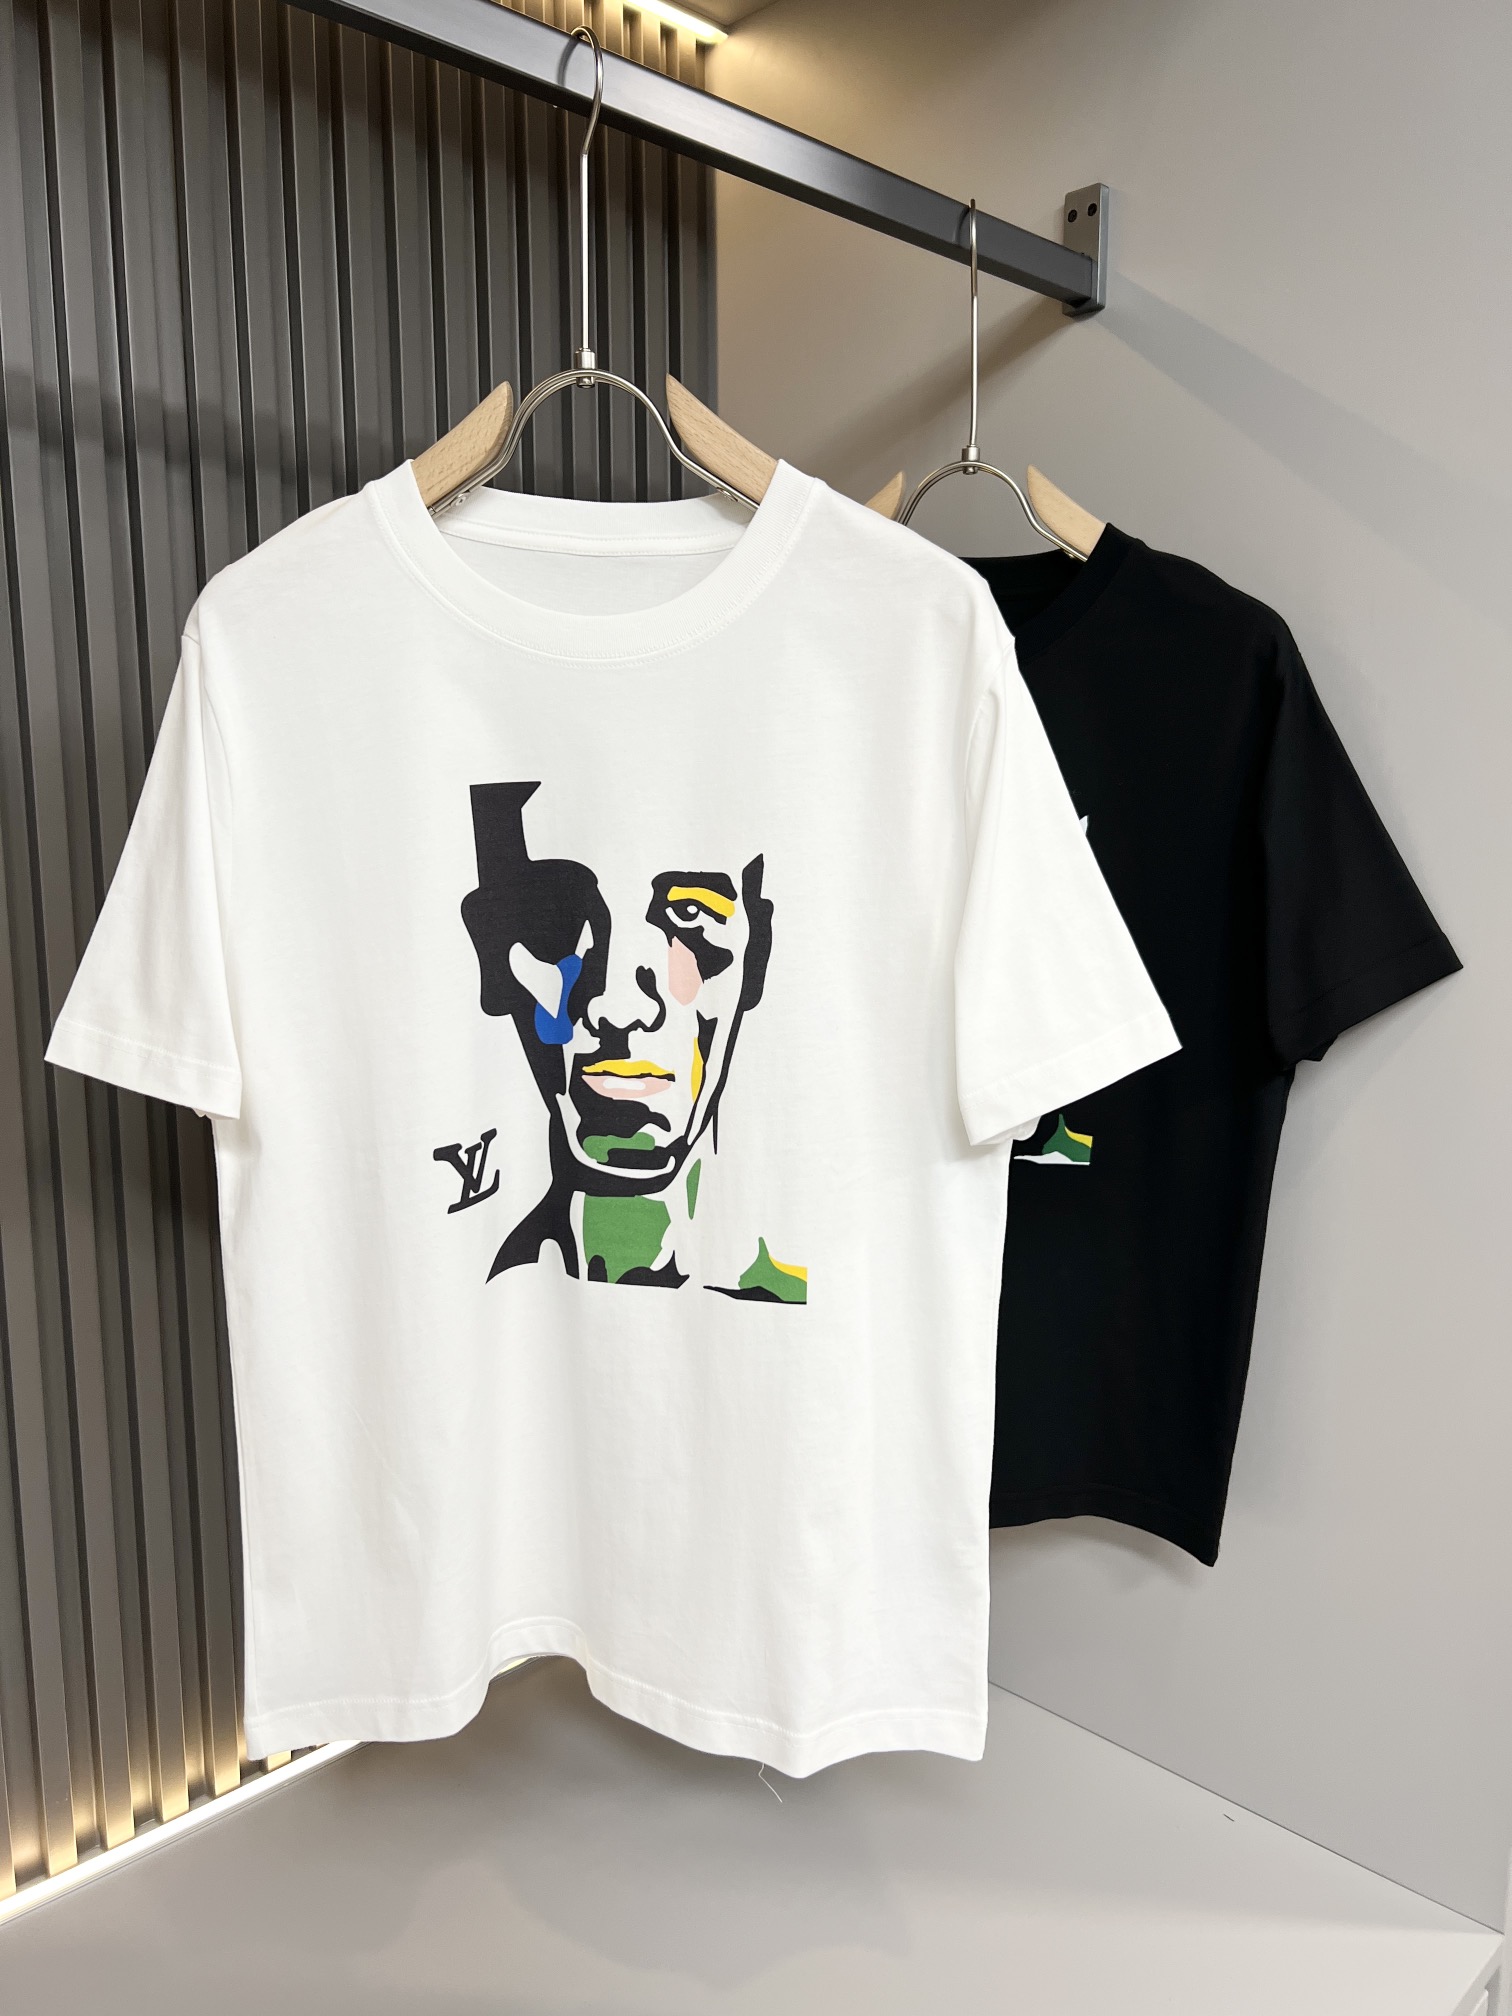 1:1 Replica
 Louis Vuitton Clothing T-Shirt Printing Unisex Cotton Spring/Summer Collection Short Sleeve